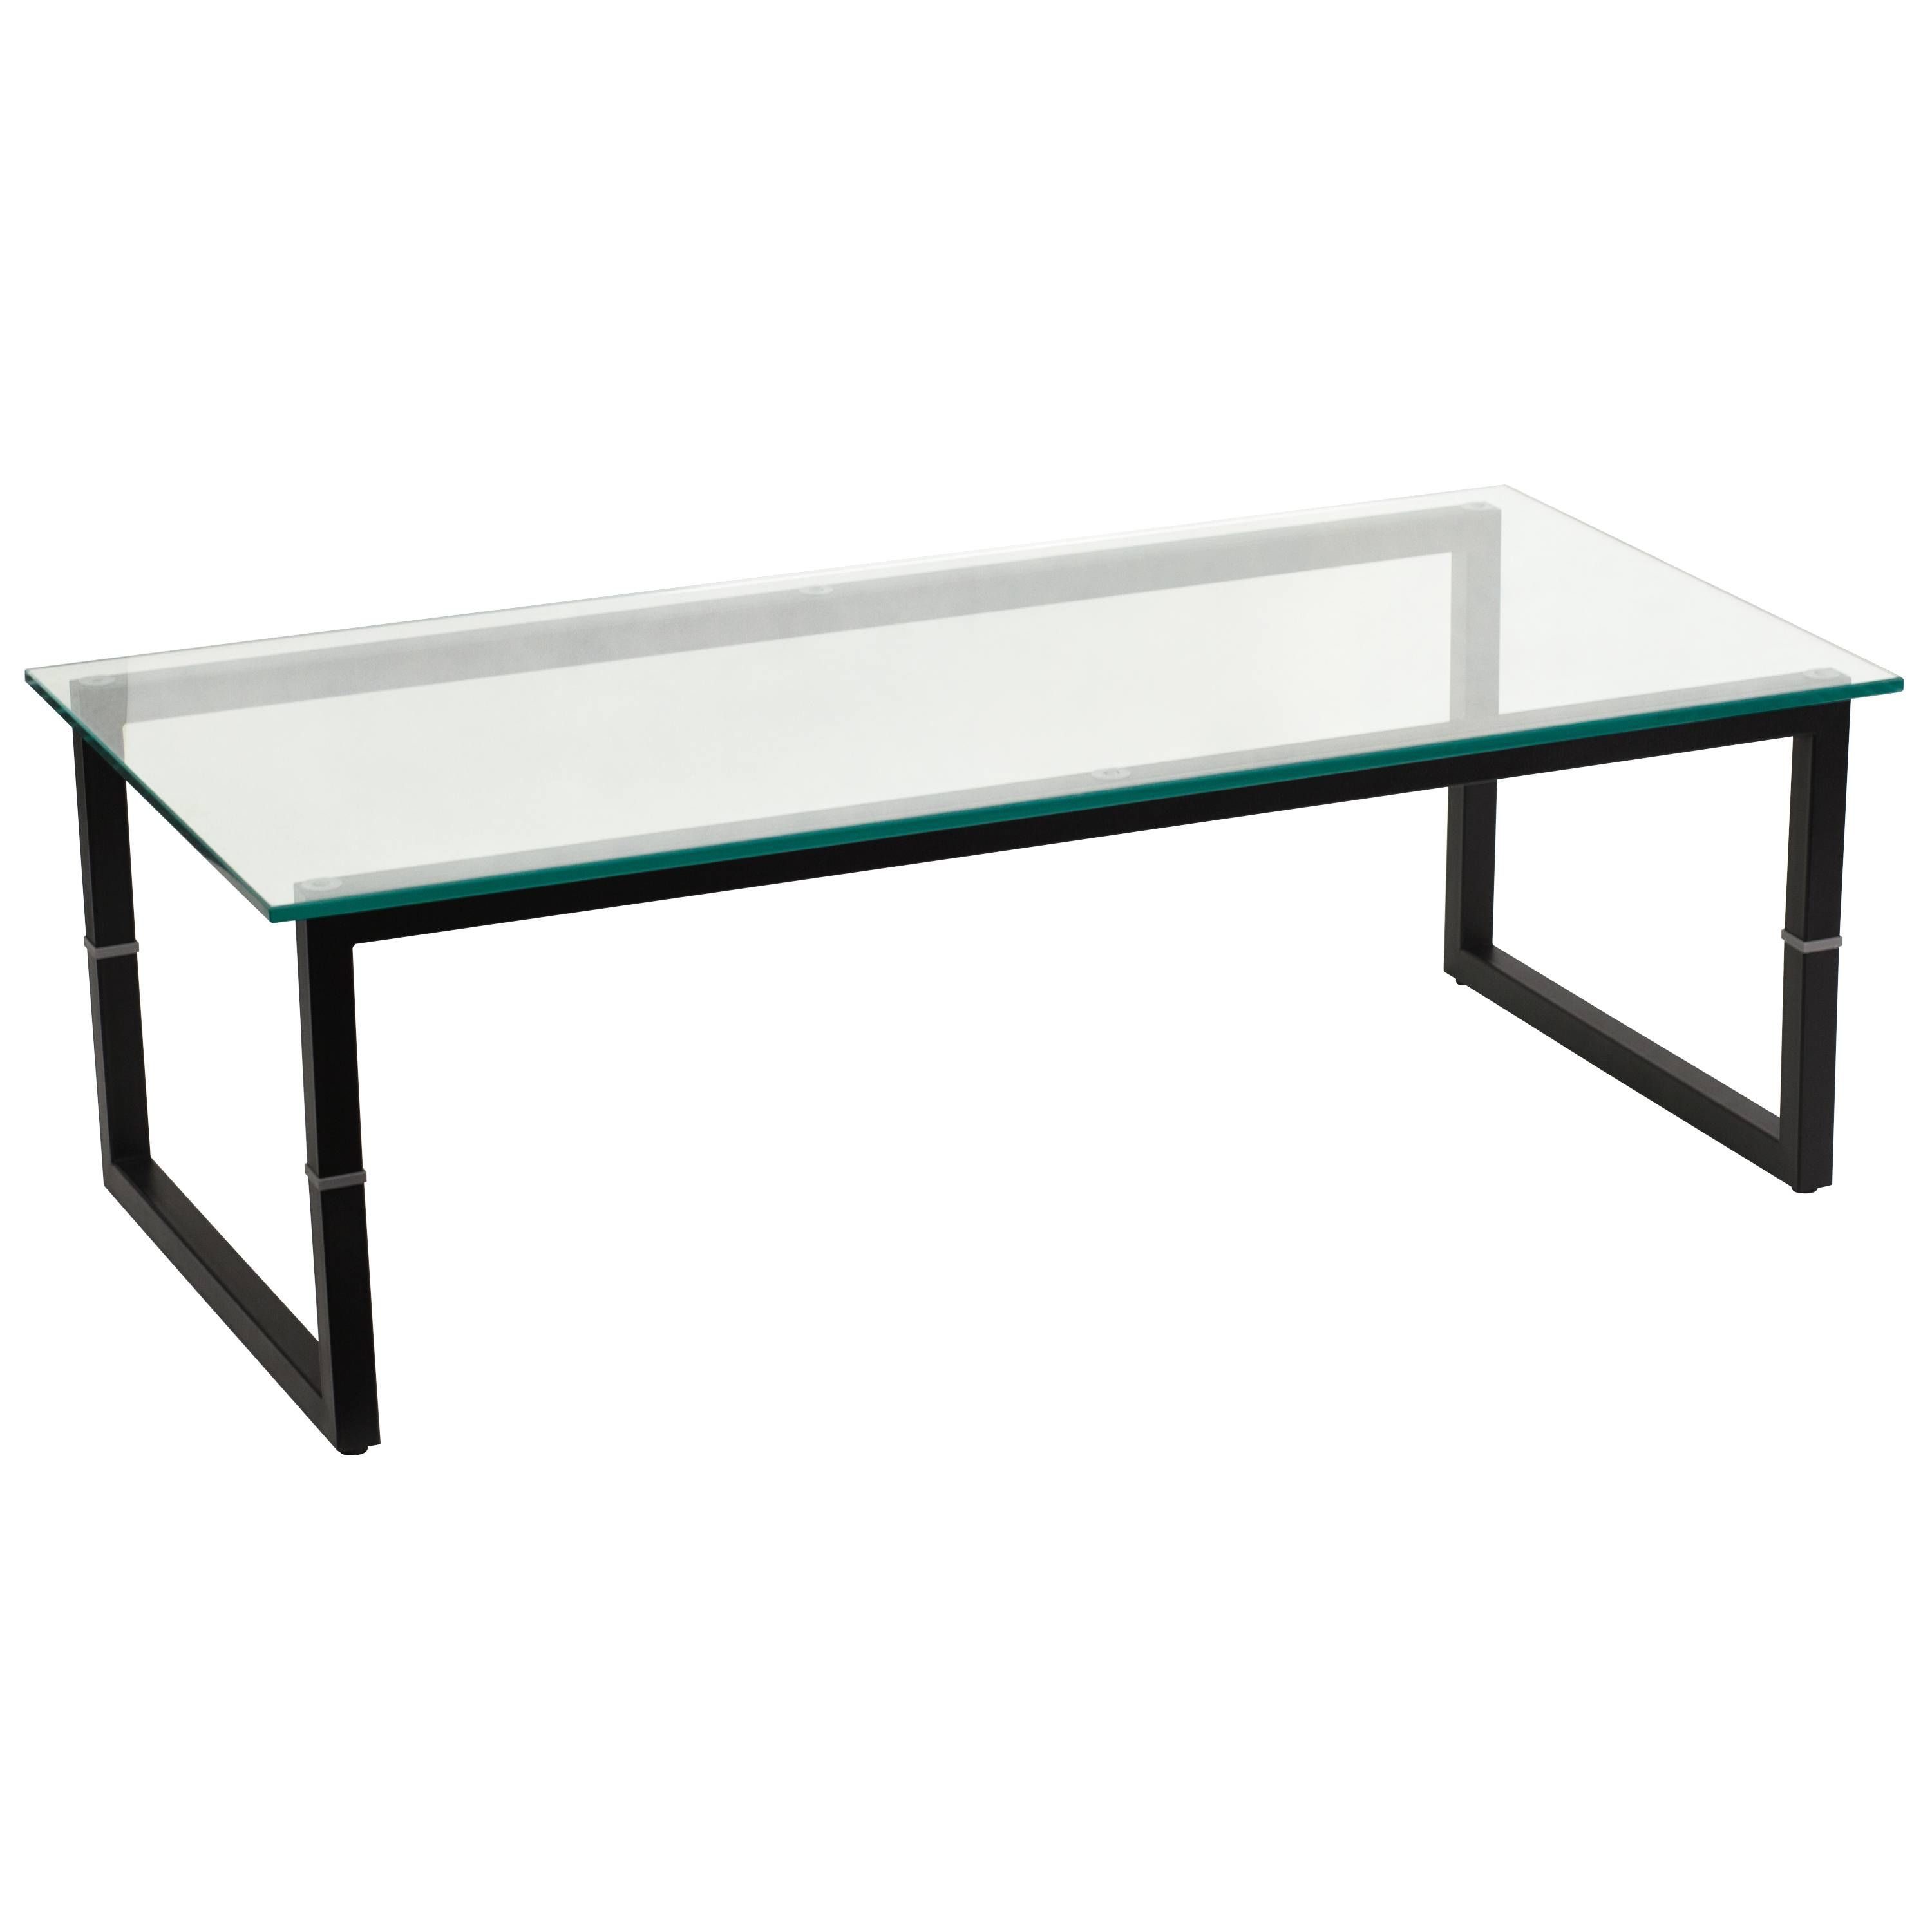 Black Metal Coffee Table With Glass Top | Coffee Tables Decoration With Coffee Tables Metal And Glass (View 4 of 30)